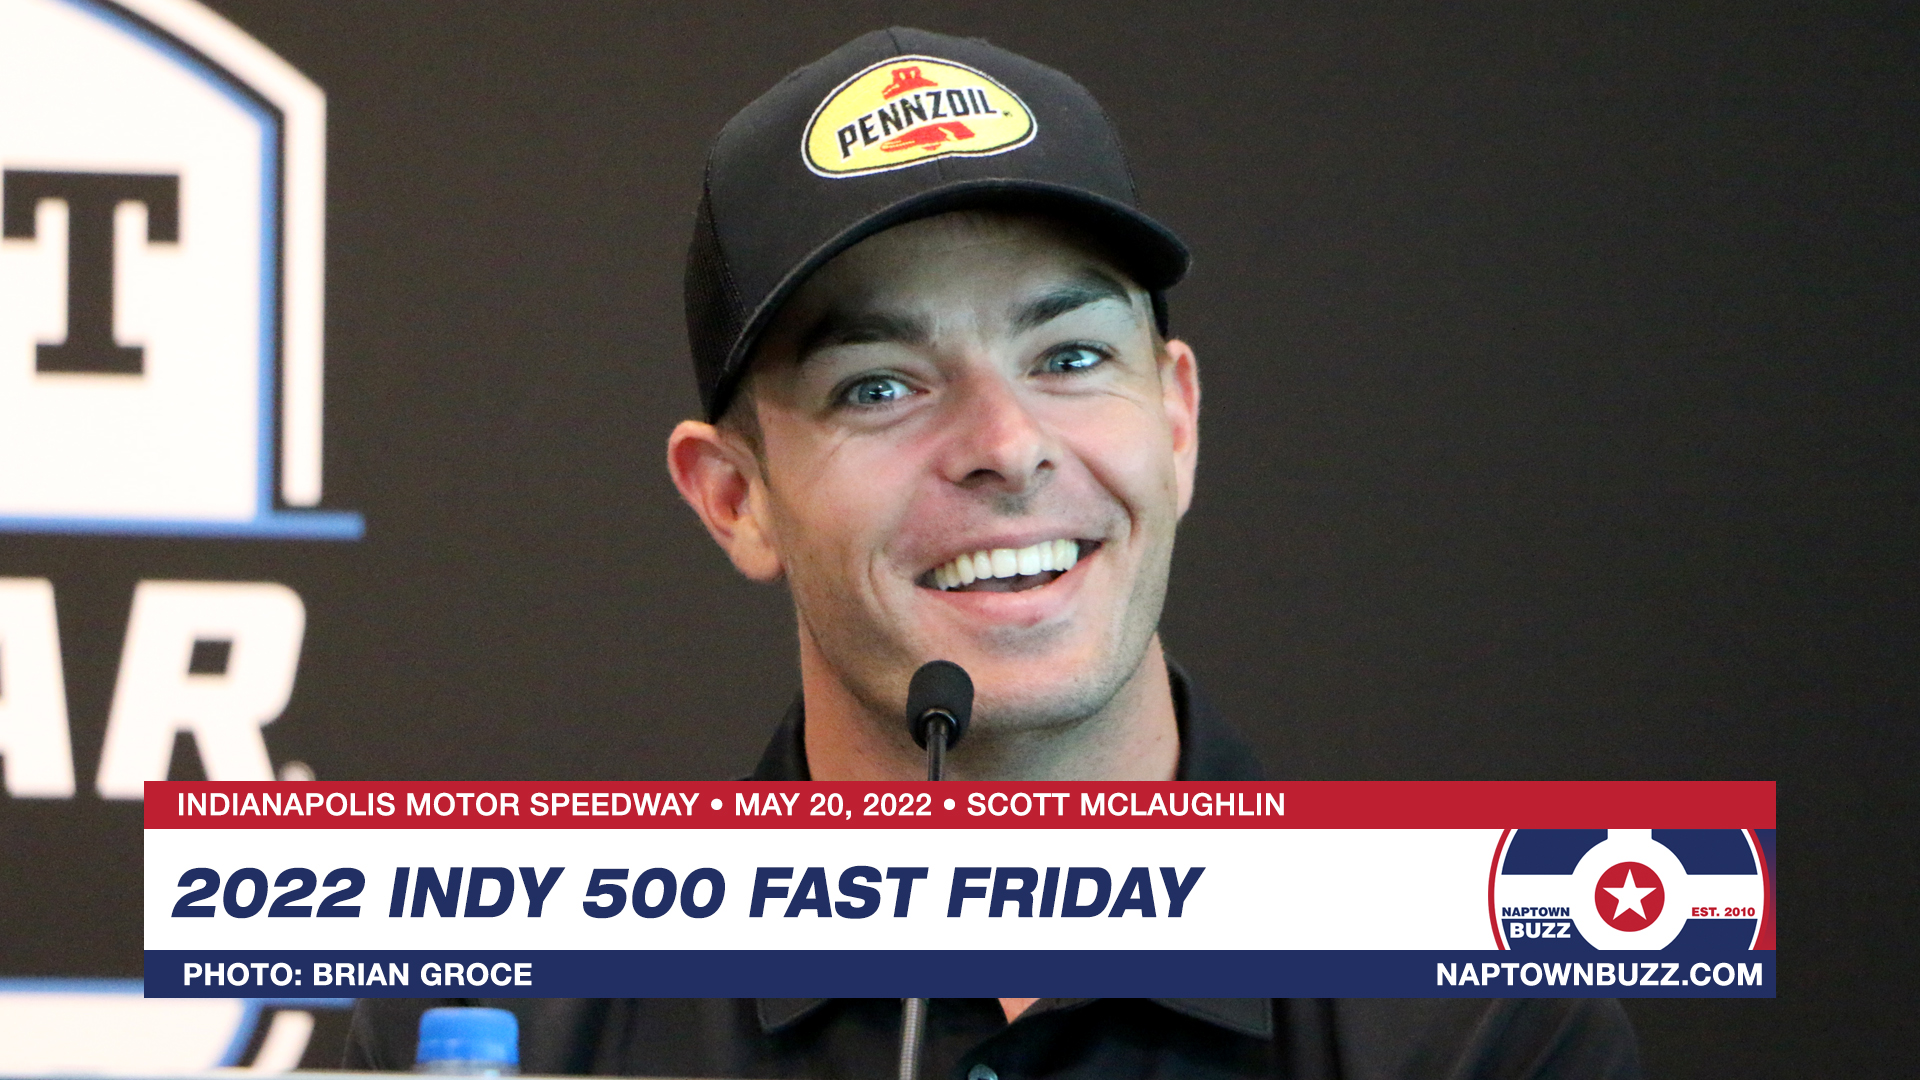 Scott McLaughlin on Indy 500 Fast Friday Practice at Indianapolis Motor Speedway on May 20, 2022